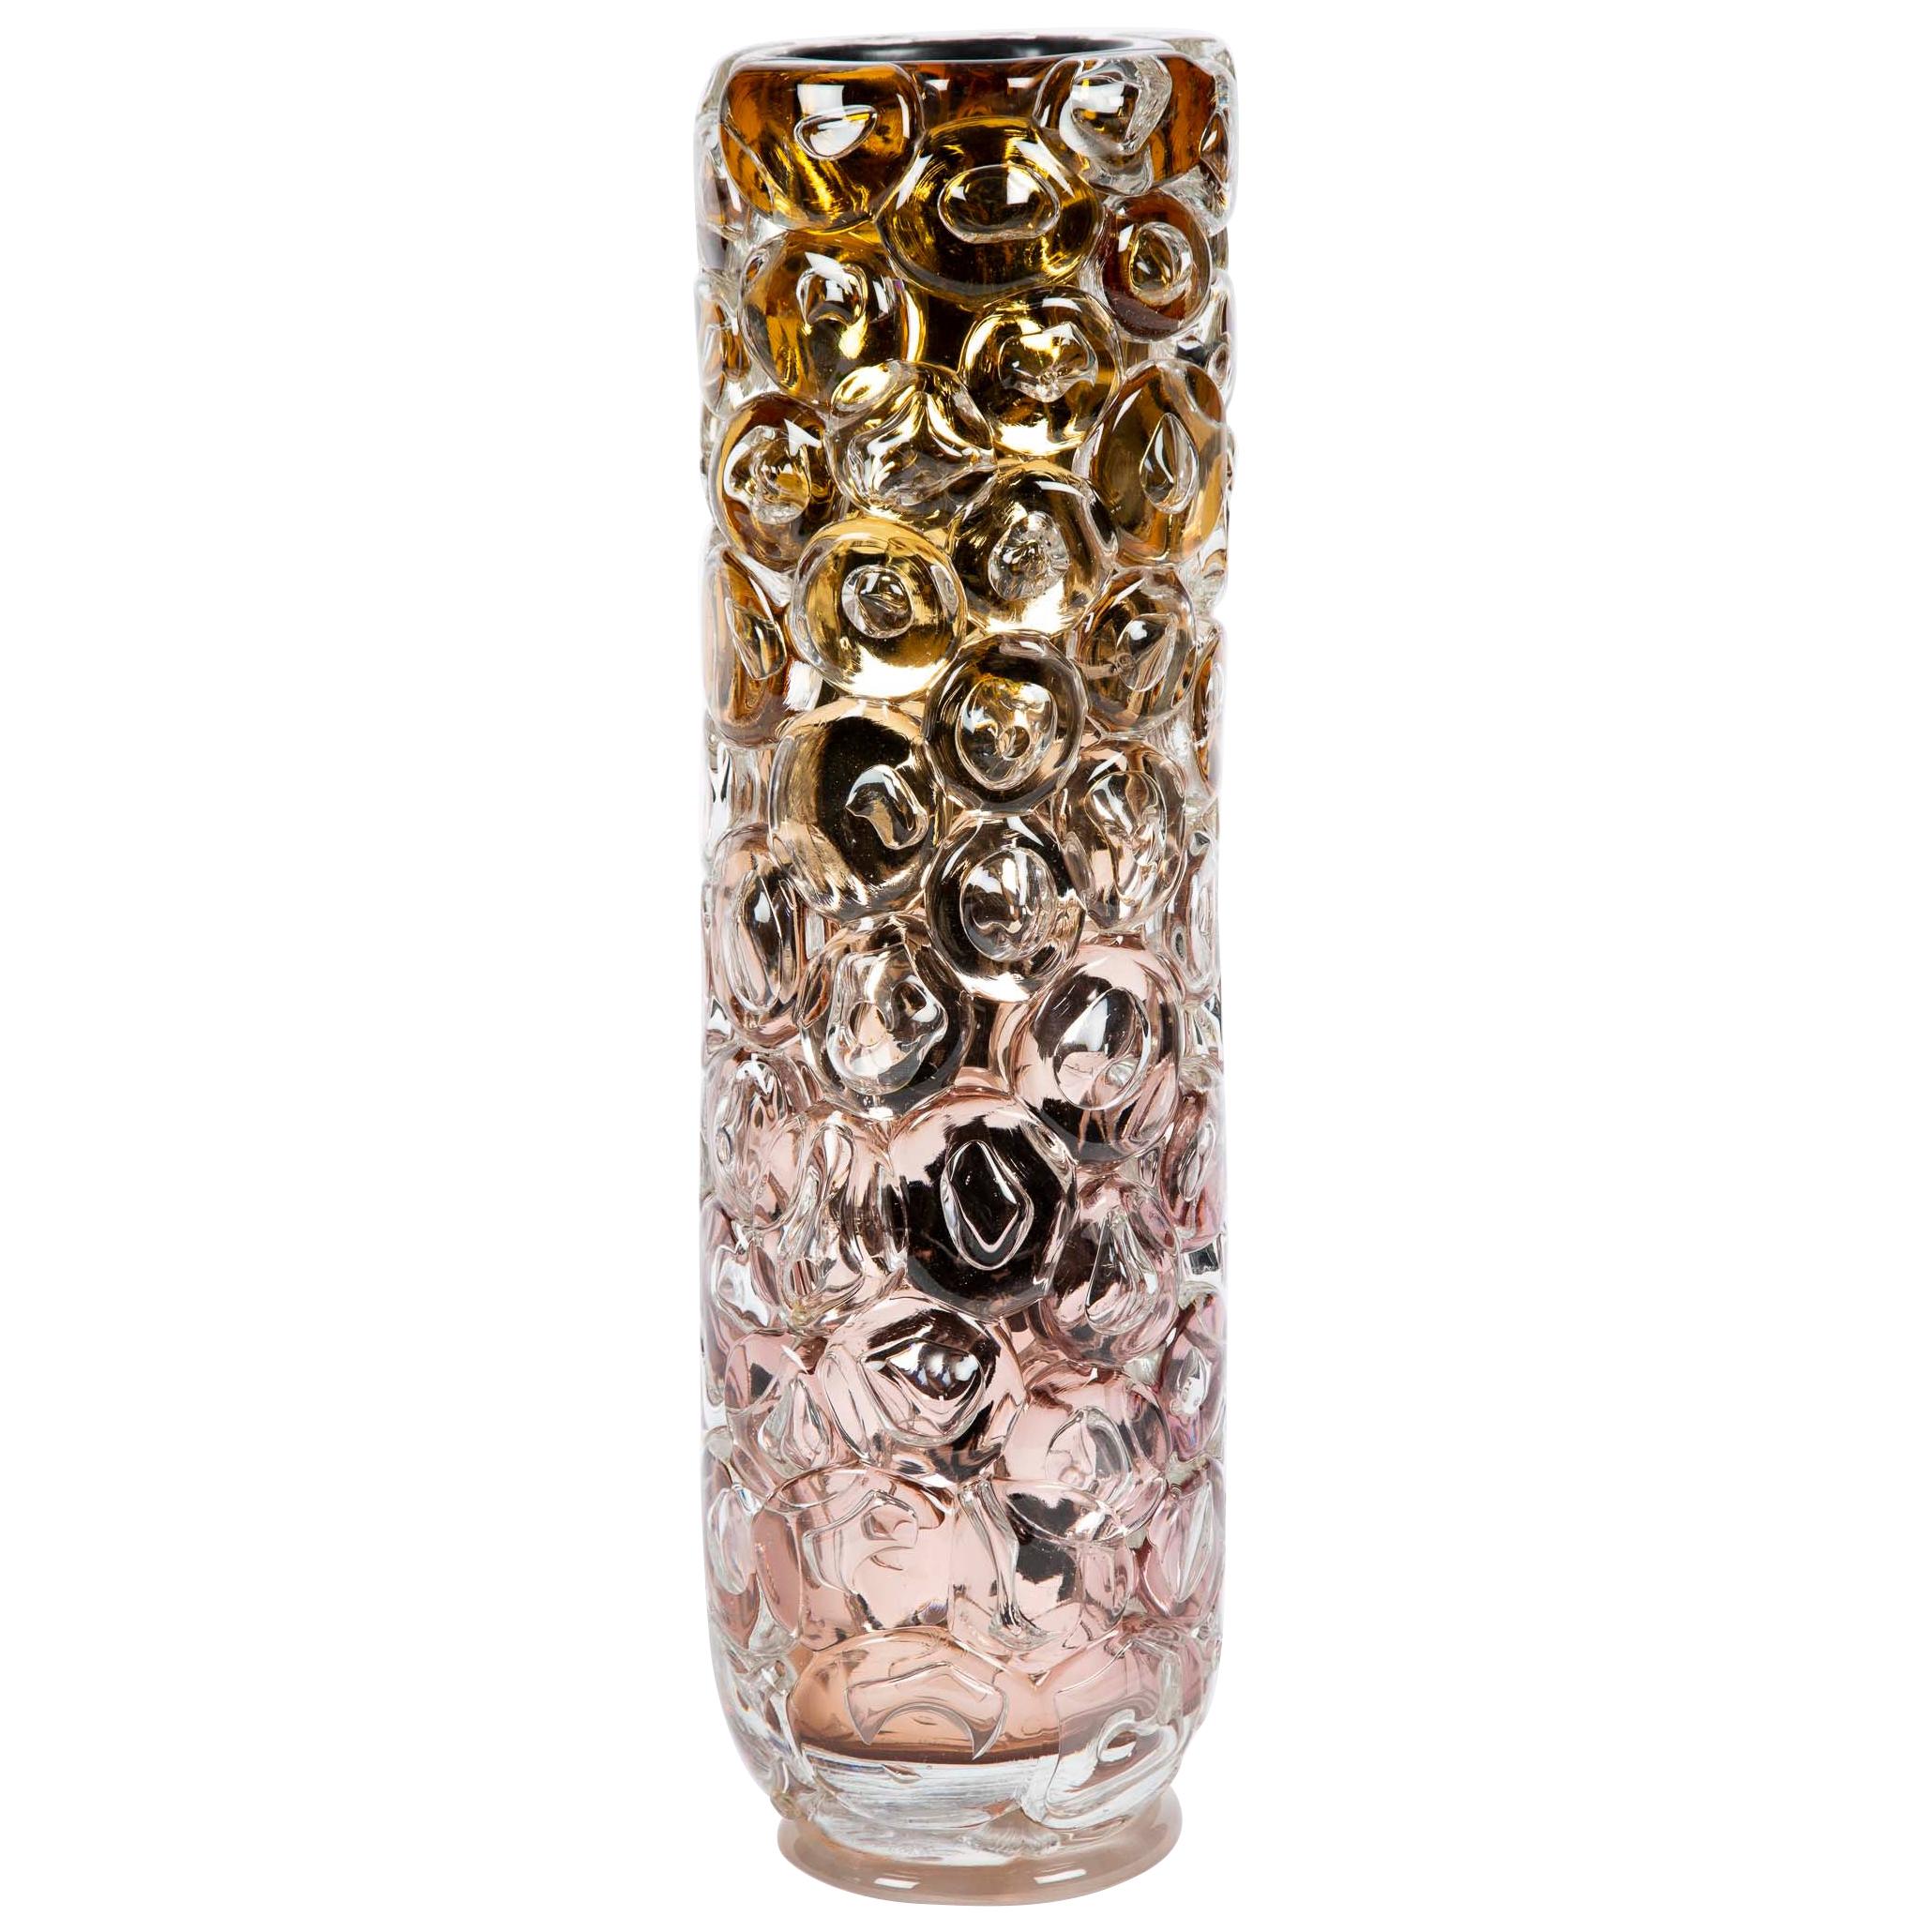 Bubblewrap in Gold, a Unique pink, gold & silver glass Vase by Allister Malcolm